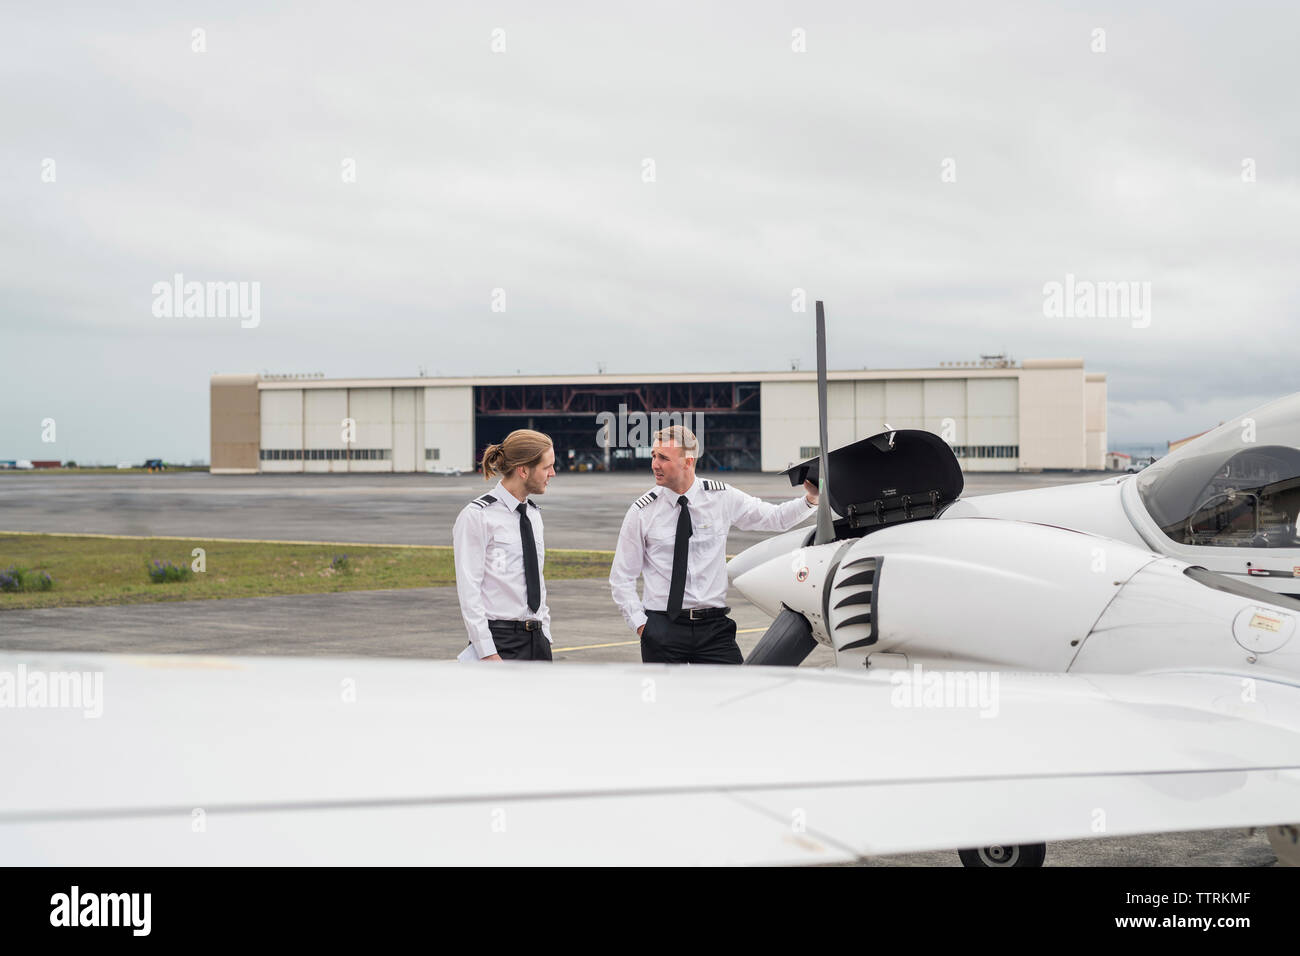 Engineer showing airplane parts to male trainee while standing against cloudy sky on airport runway Stock Photo